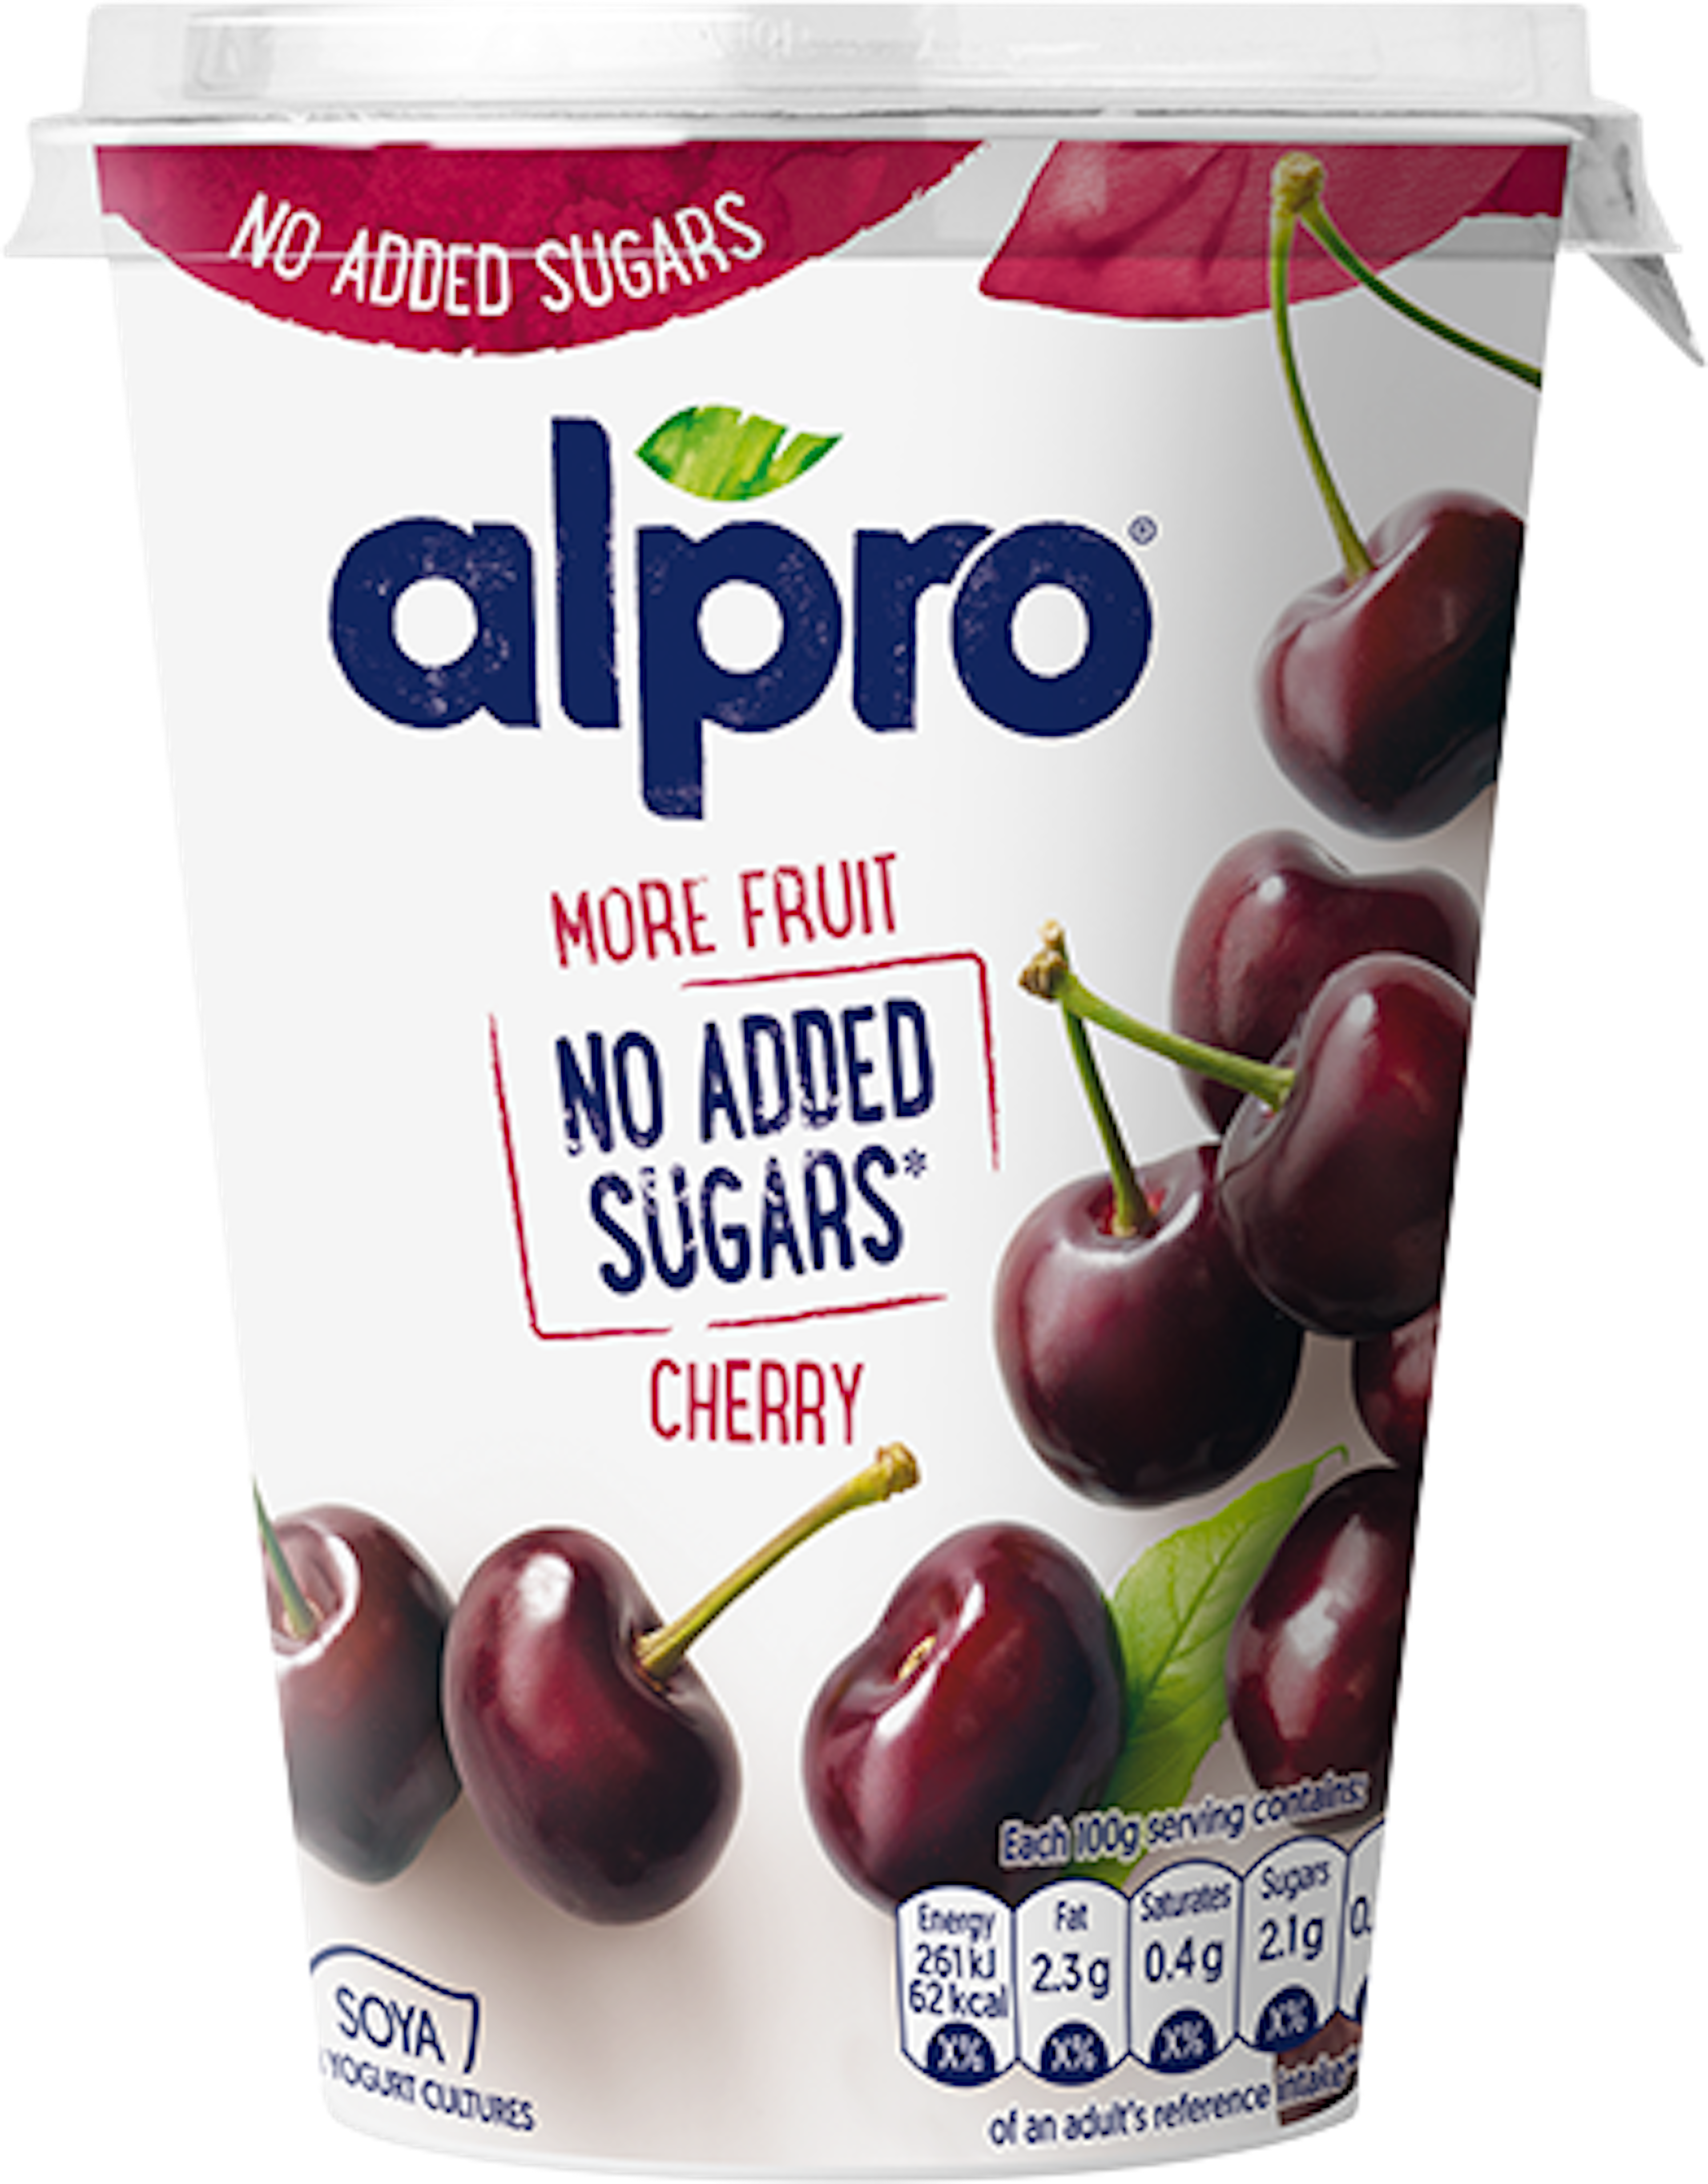 More fruit, no added sugars cherry